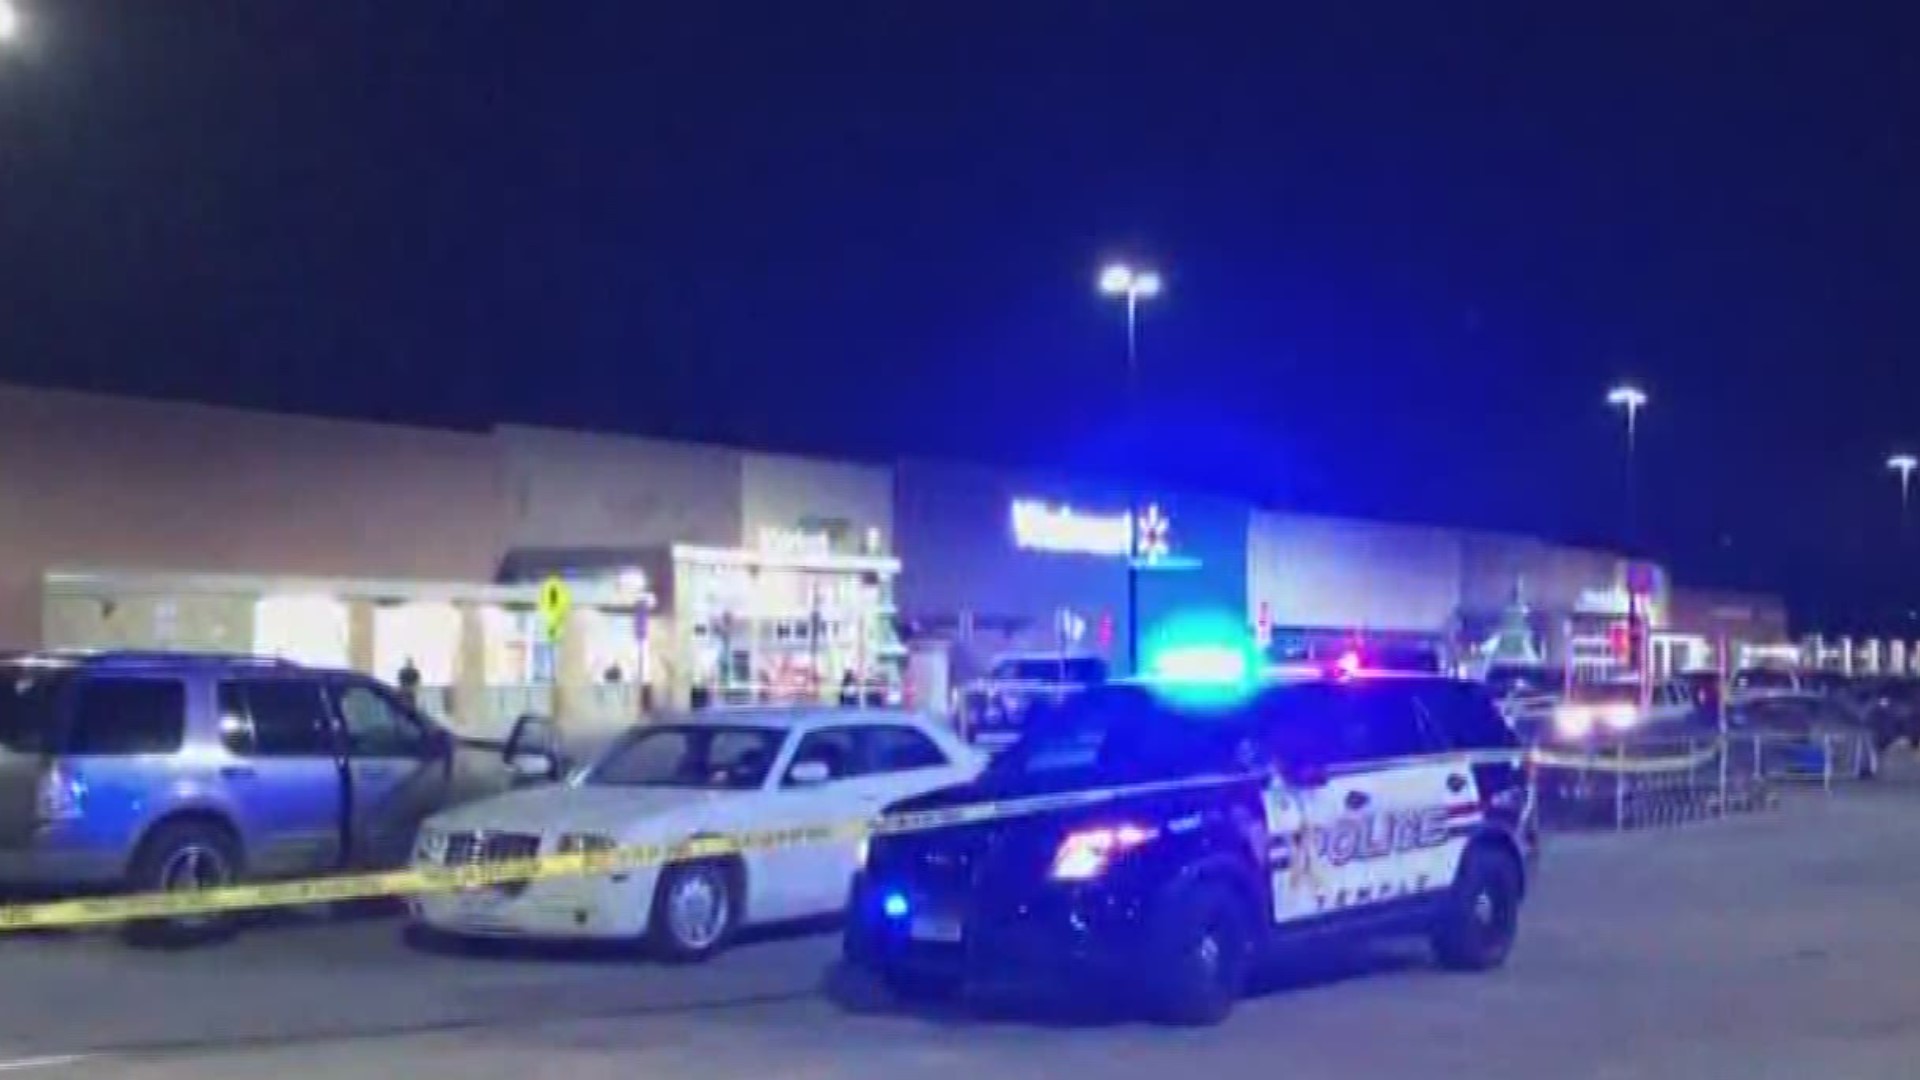 Two teenage girls were arrested in connection to the shooting death of another teenager at a Temple Walmart.